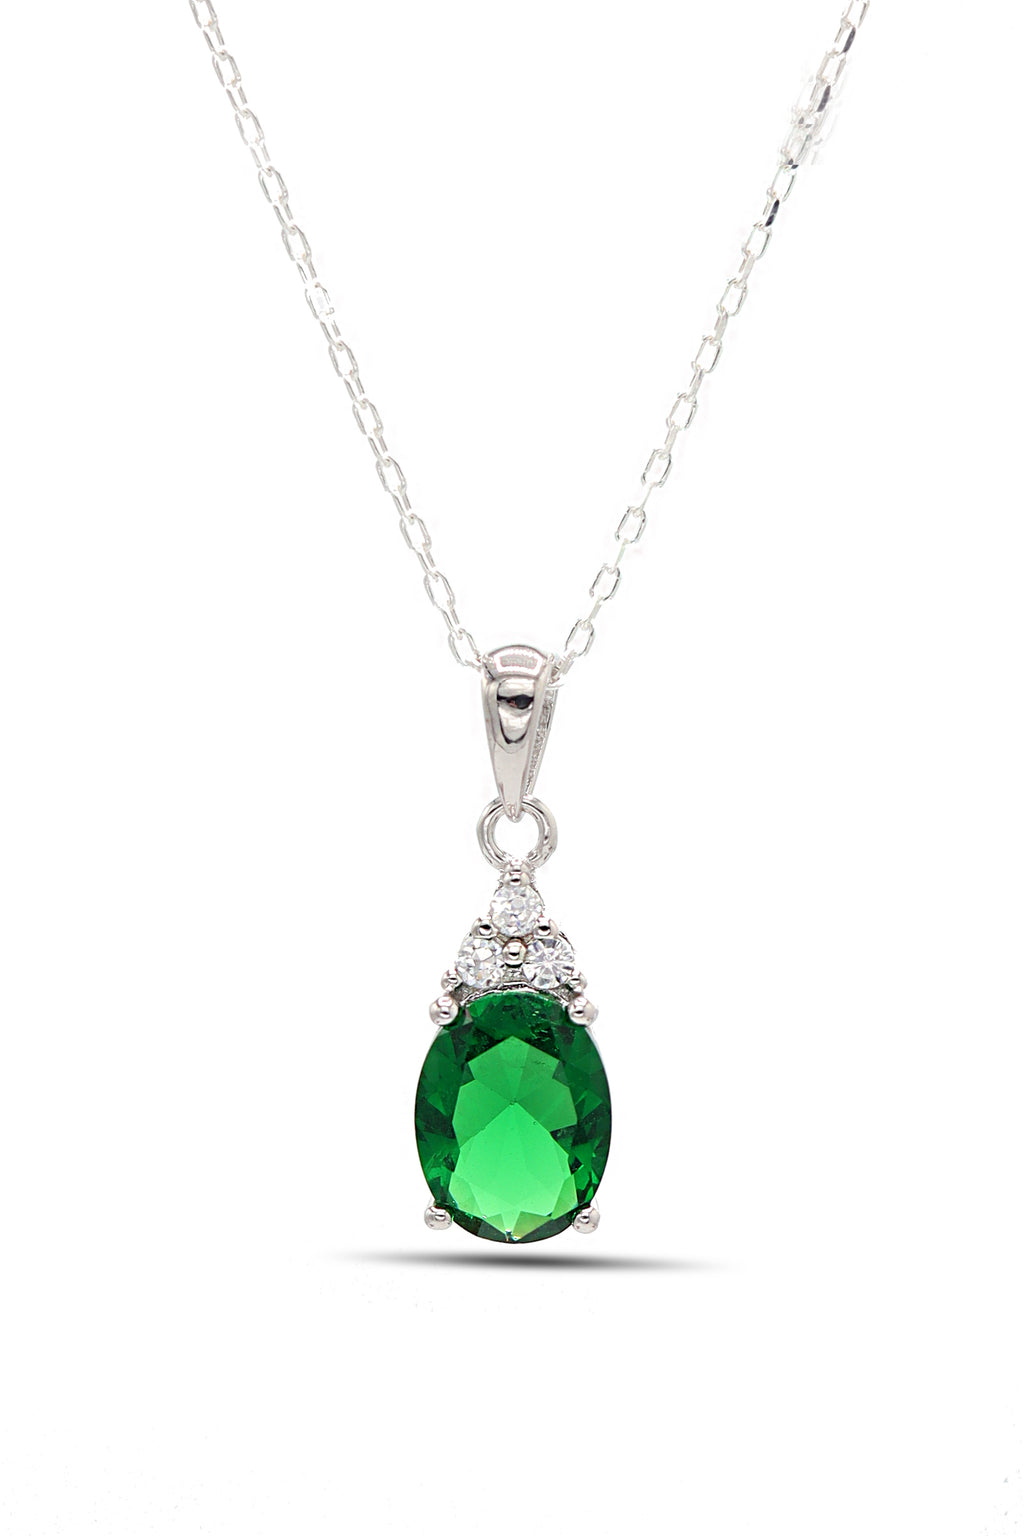 Oval Model Silver Necklace With Emerald and Zircon (NG201021898)